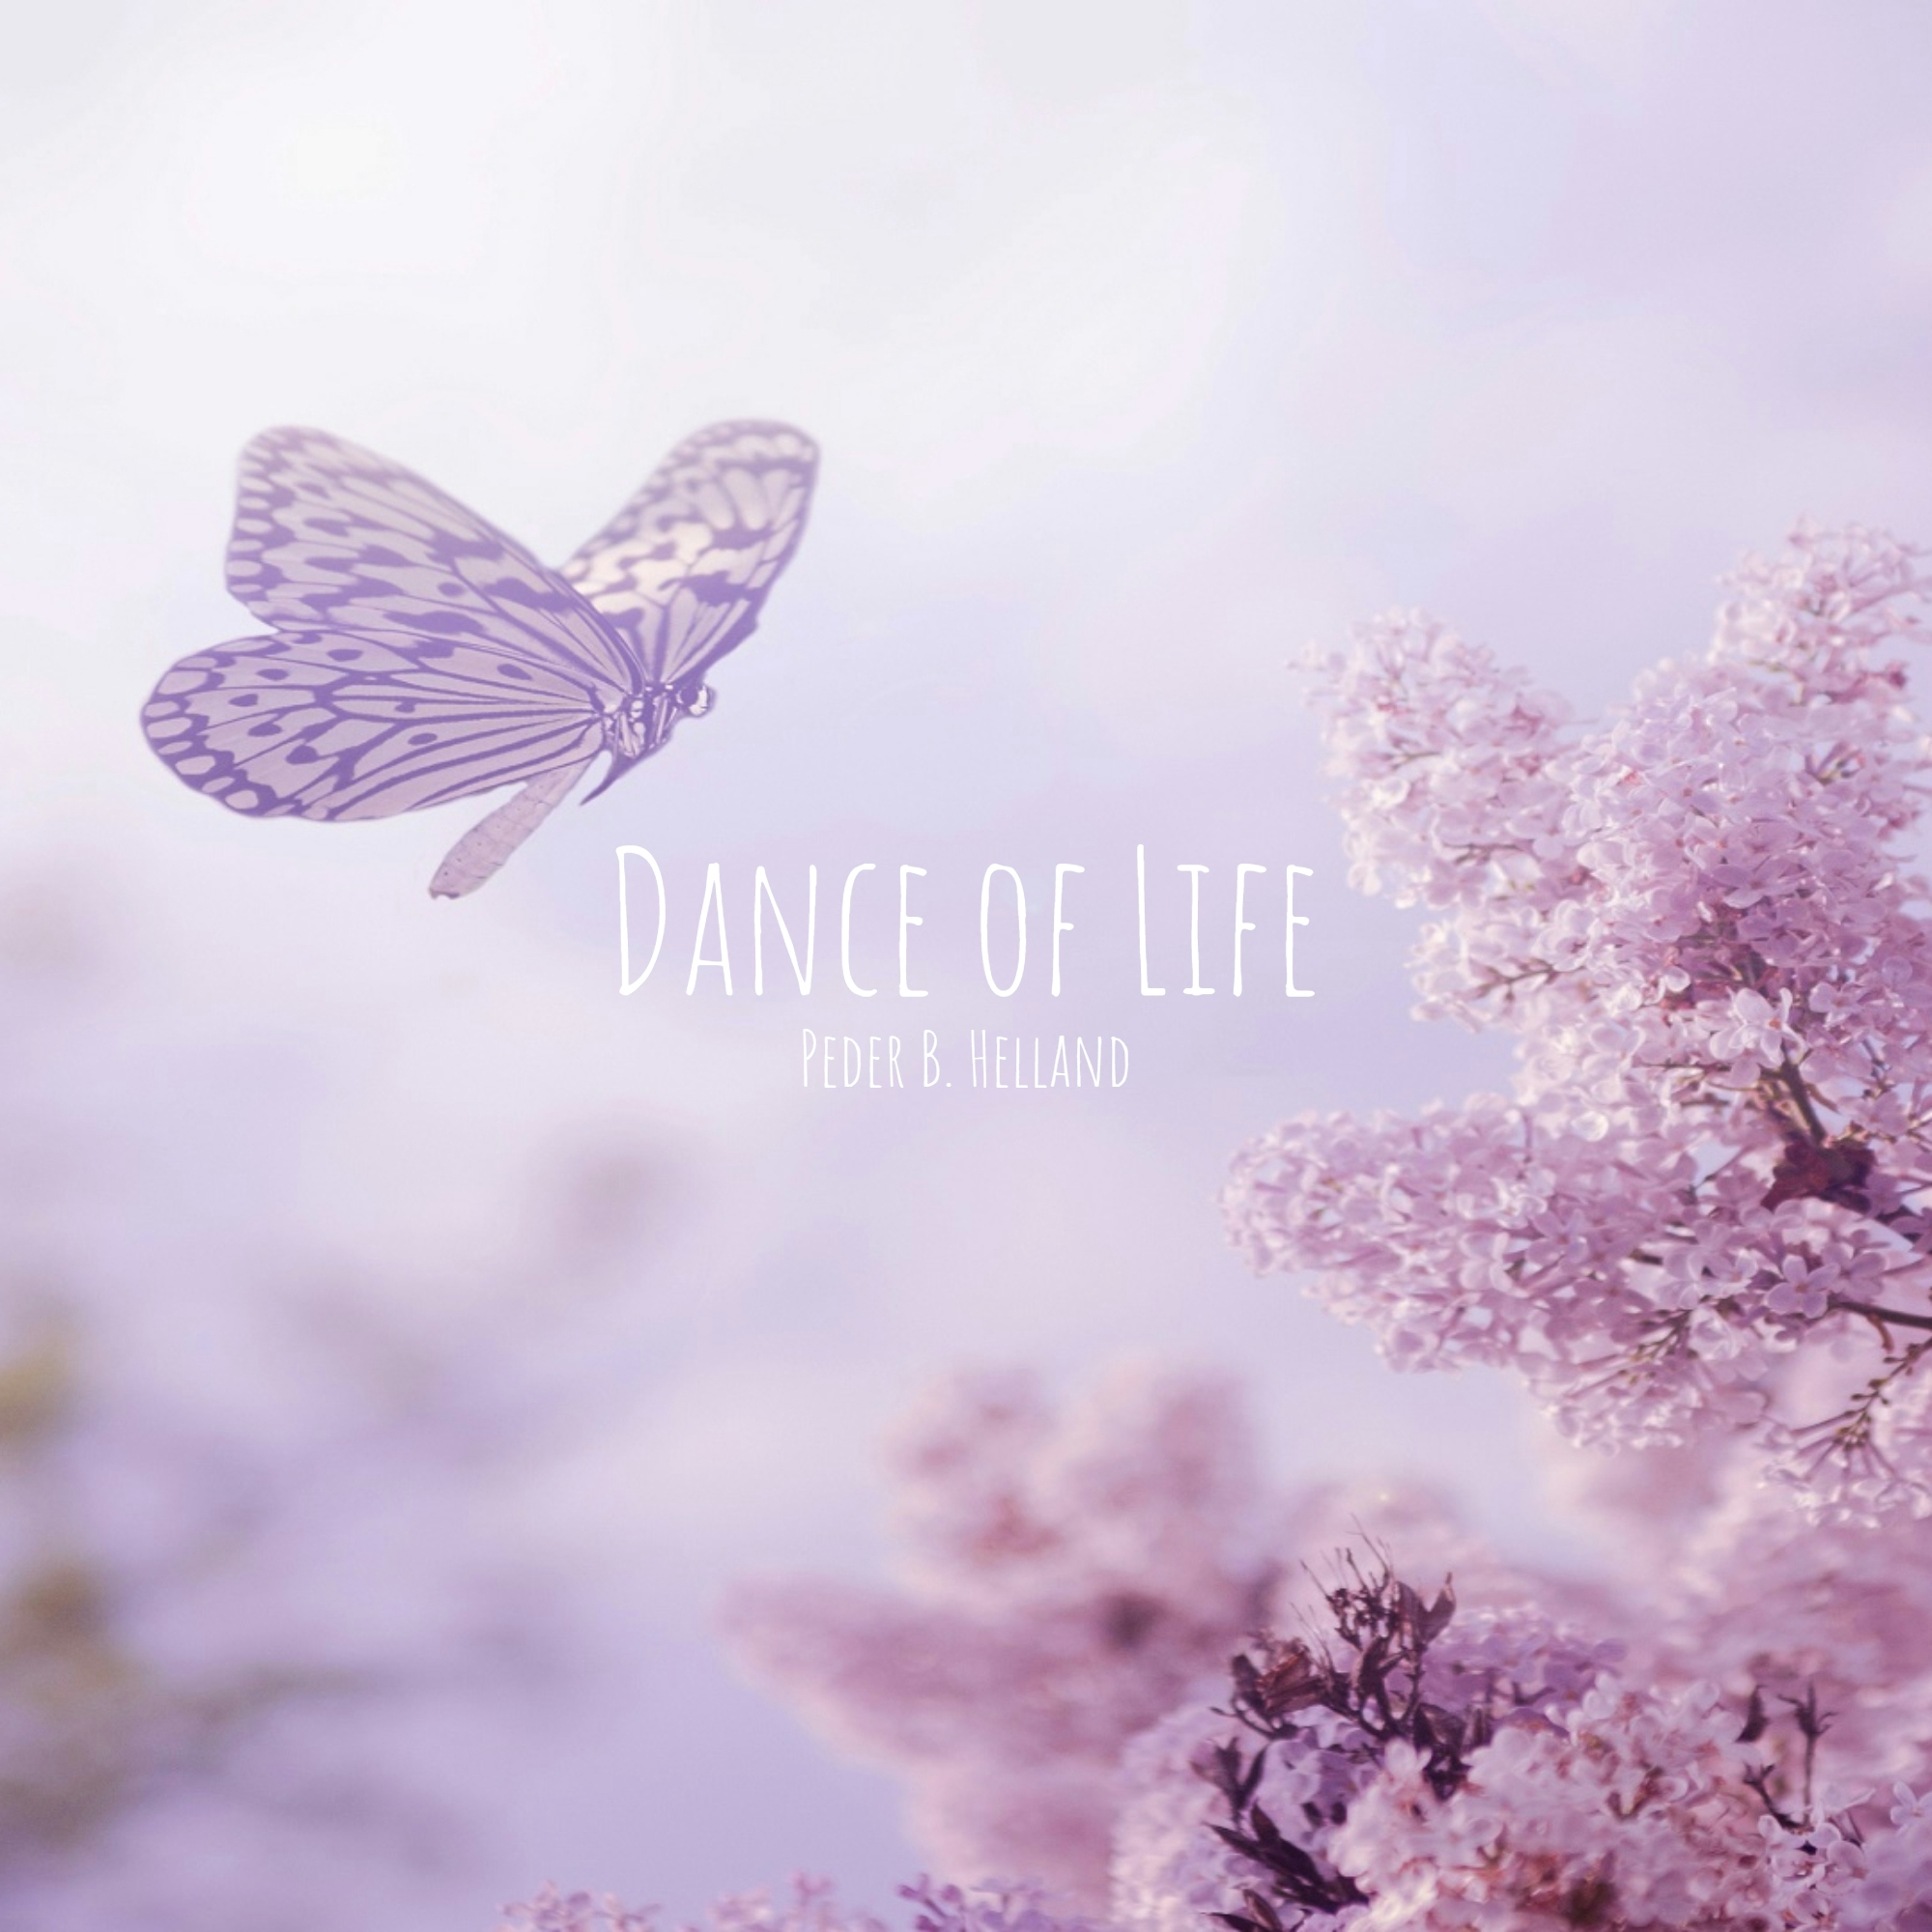 Cover art for the single Dance of Life by Peder B. Helland